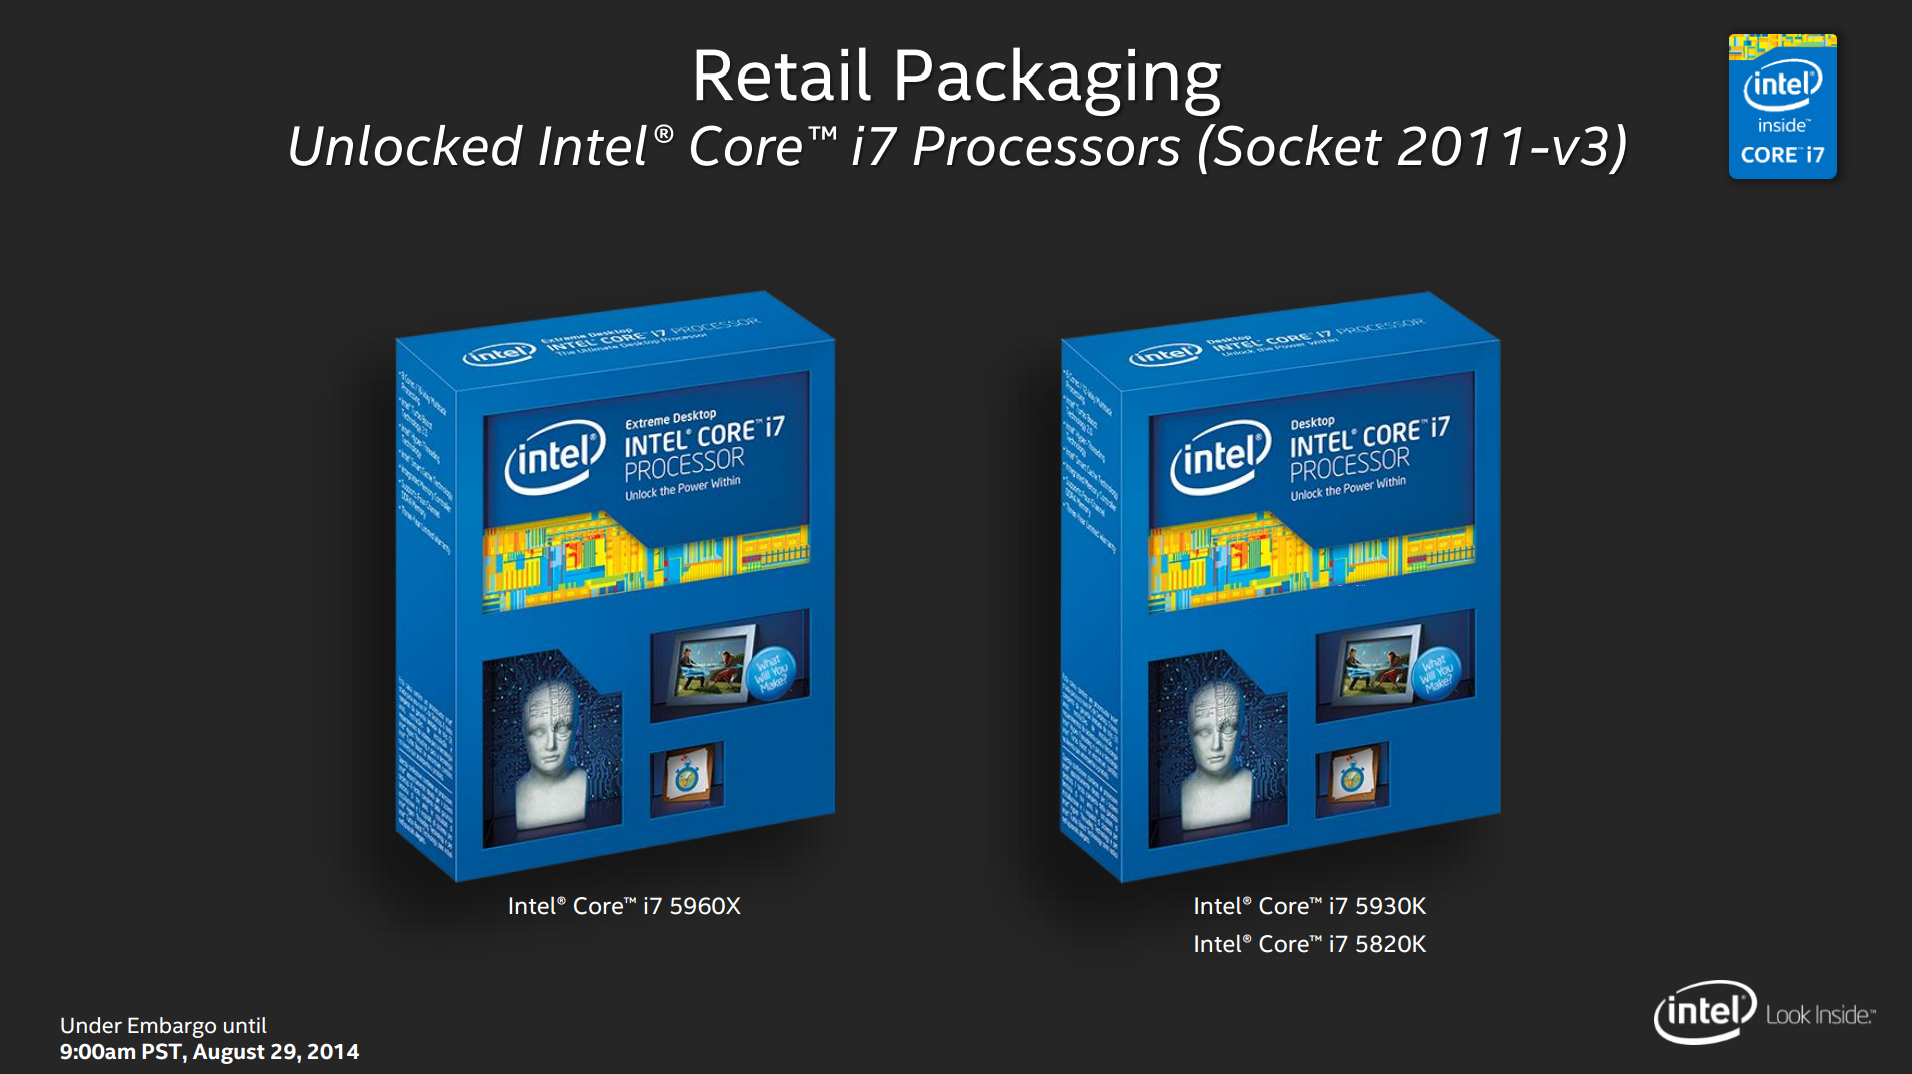 Zijdelings Verbieden Harmonisch The Intel Haswell-E CPU Review: Core i7-5960X, i7-5930K and i7-5820K Tested